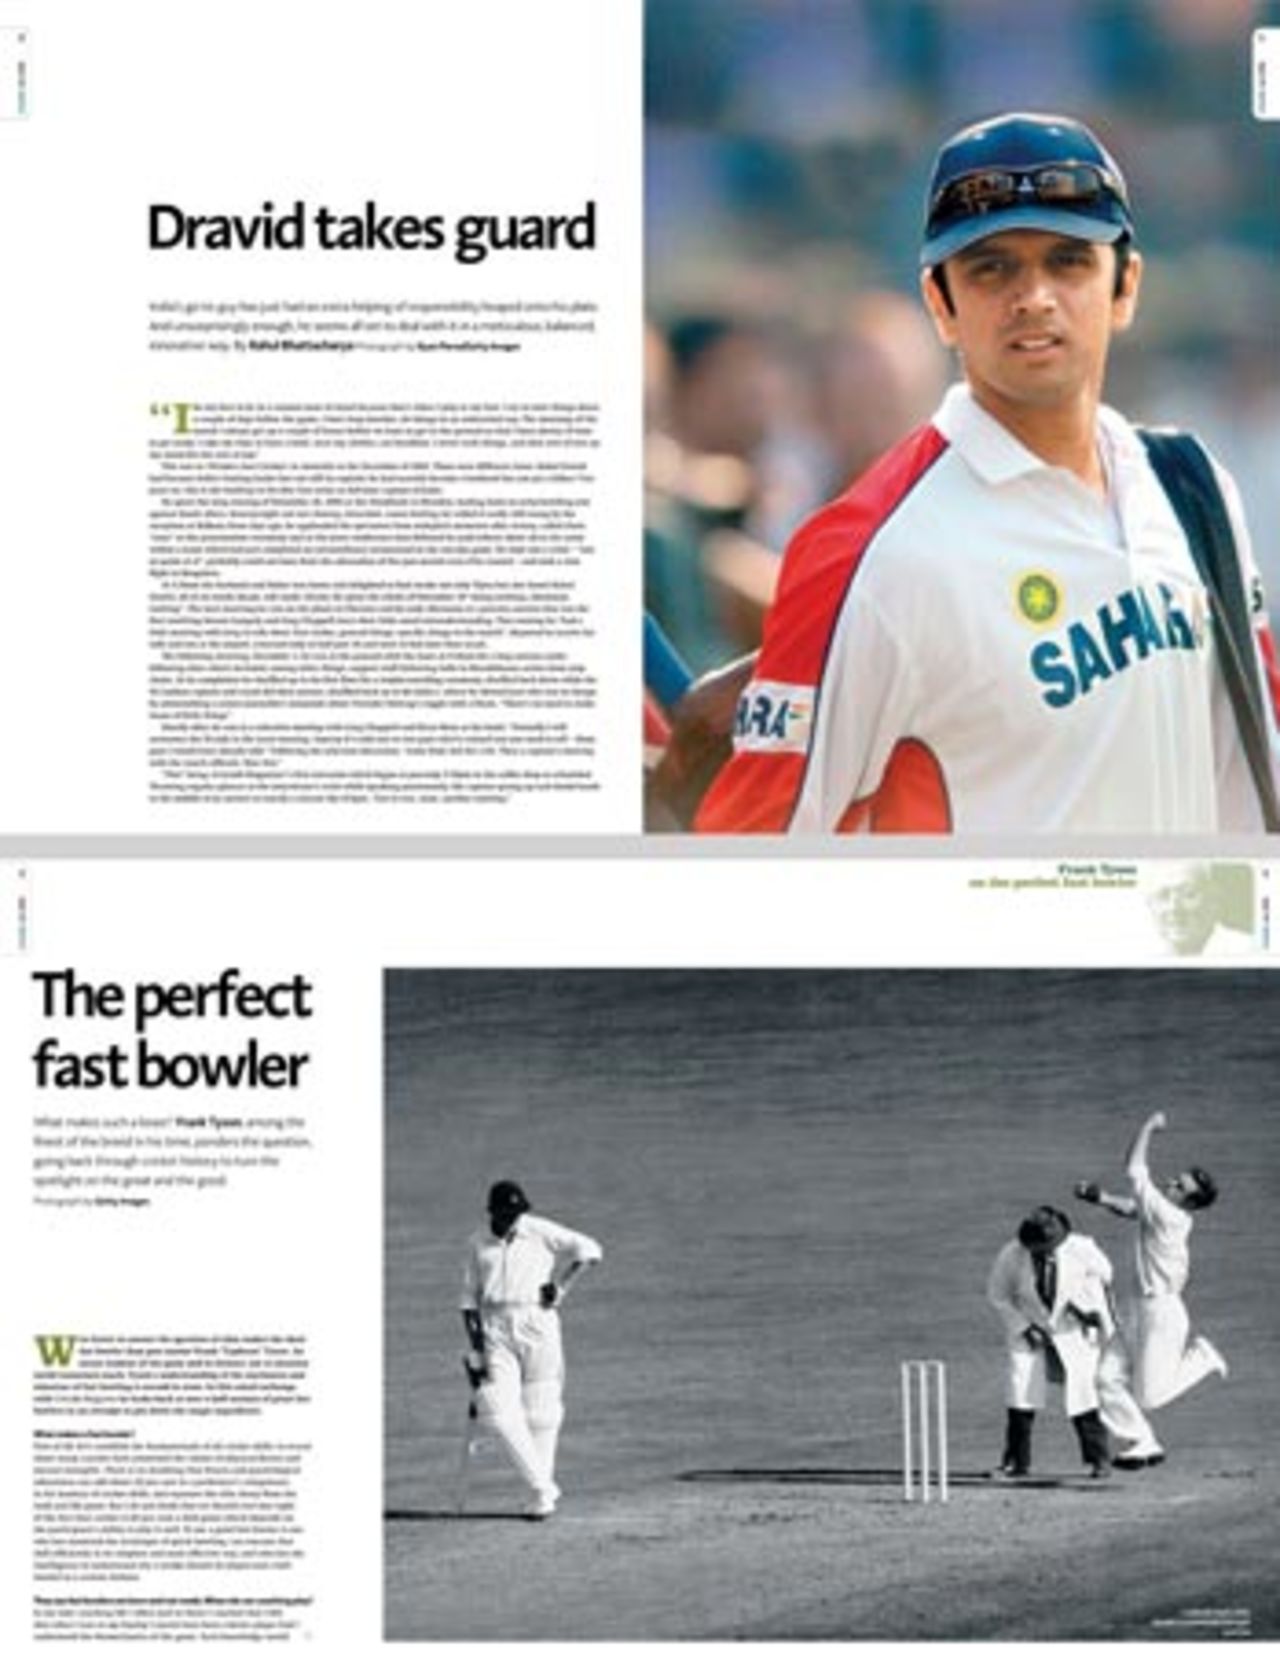 The first issue of <i>Cricinfo Magazine</i> will be a 124-page special featuring interviews with Rahul Dravid, Greg Chappell and Virender Sehwag, and a comprehensive feature on the art of fast bowling